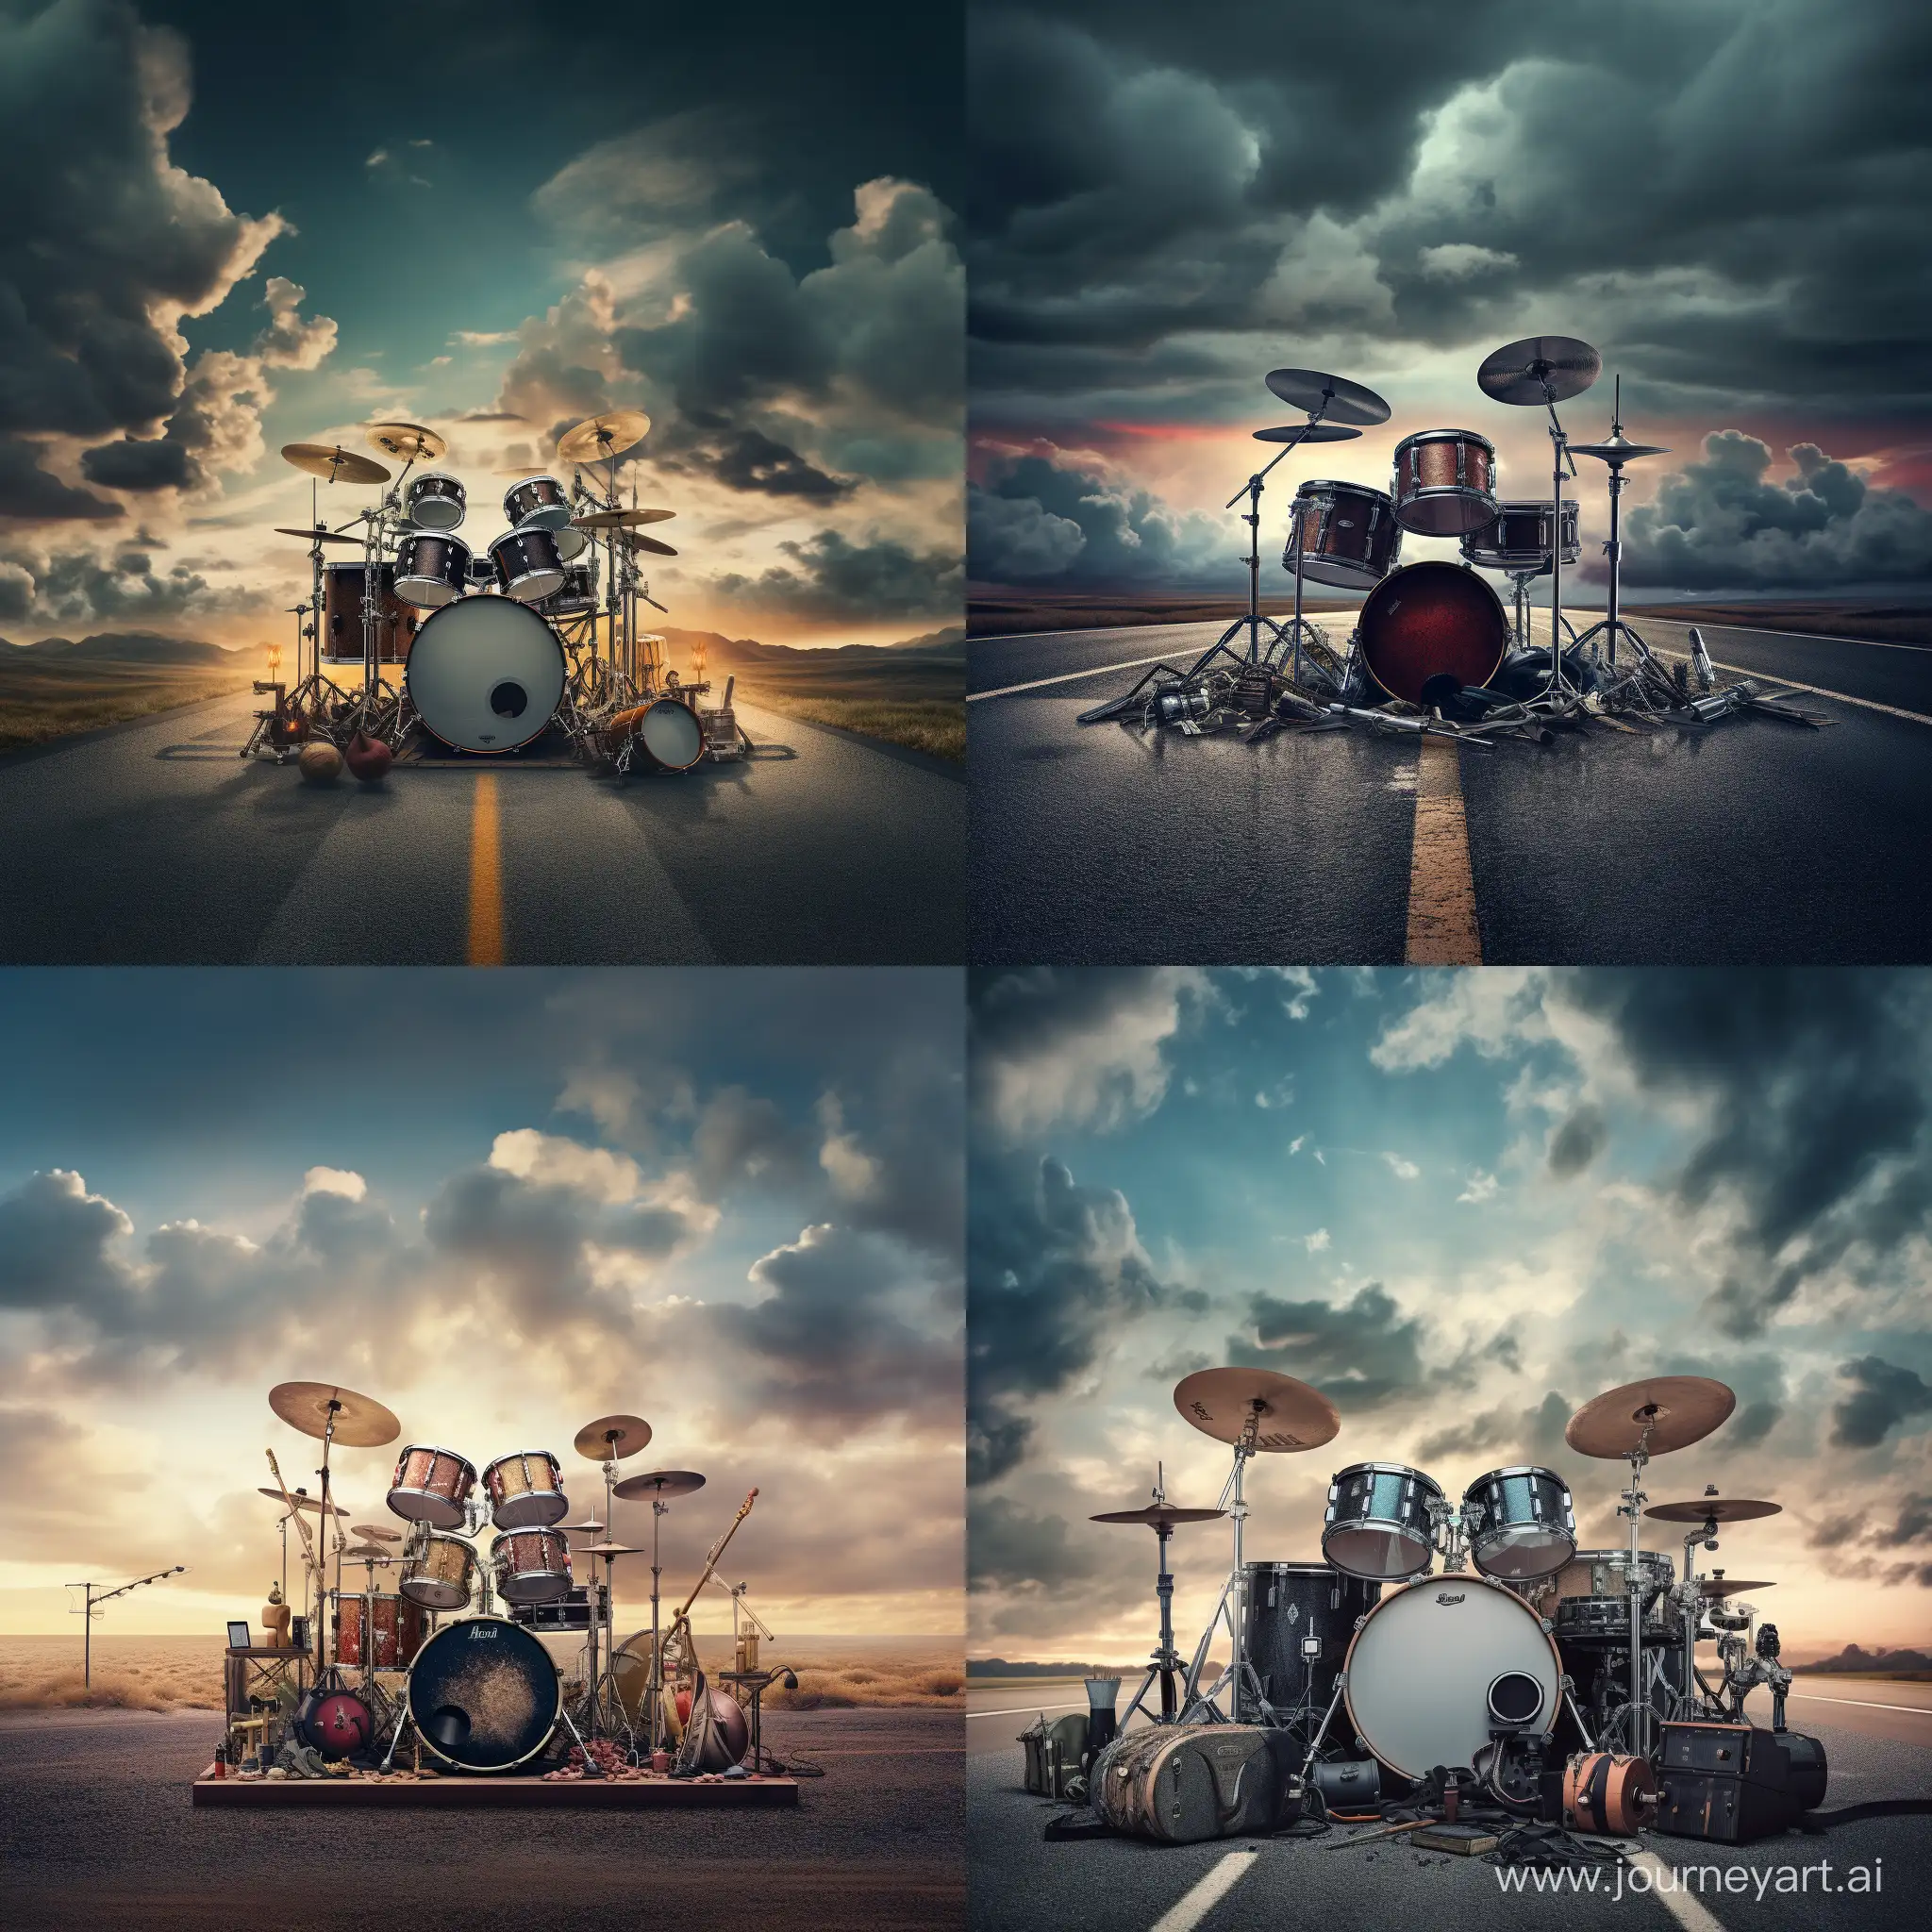 a drum kit standing on a truck it the middle of the highway, the sky before the storm